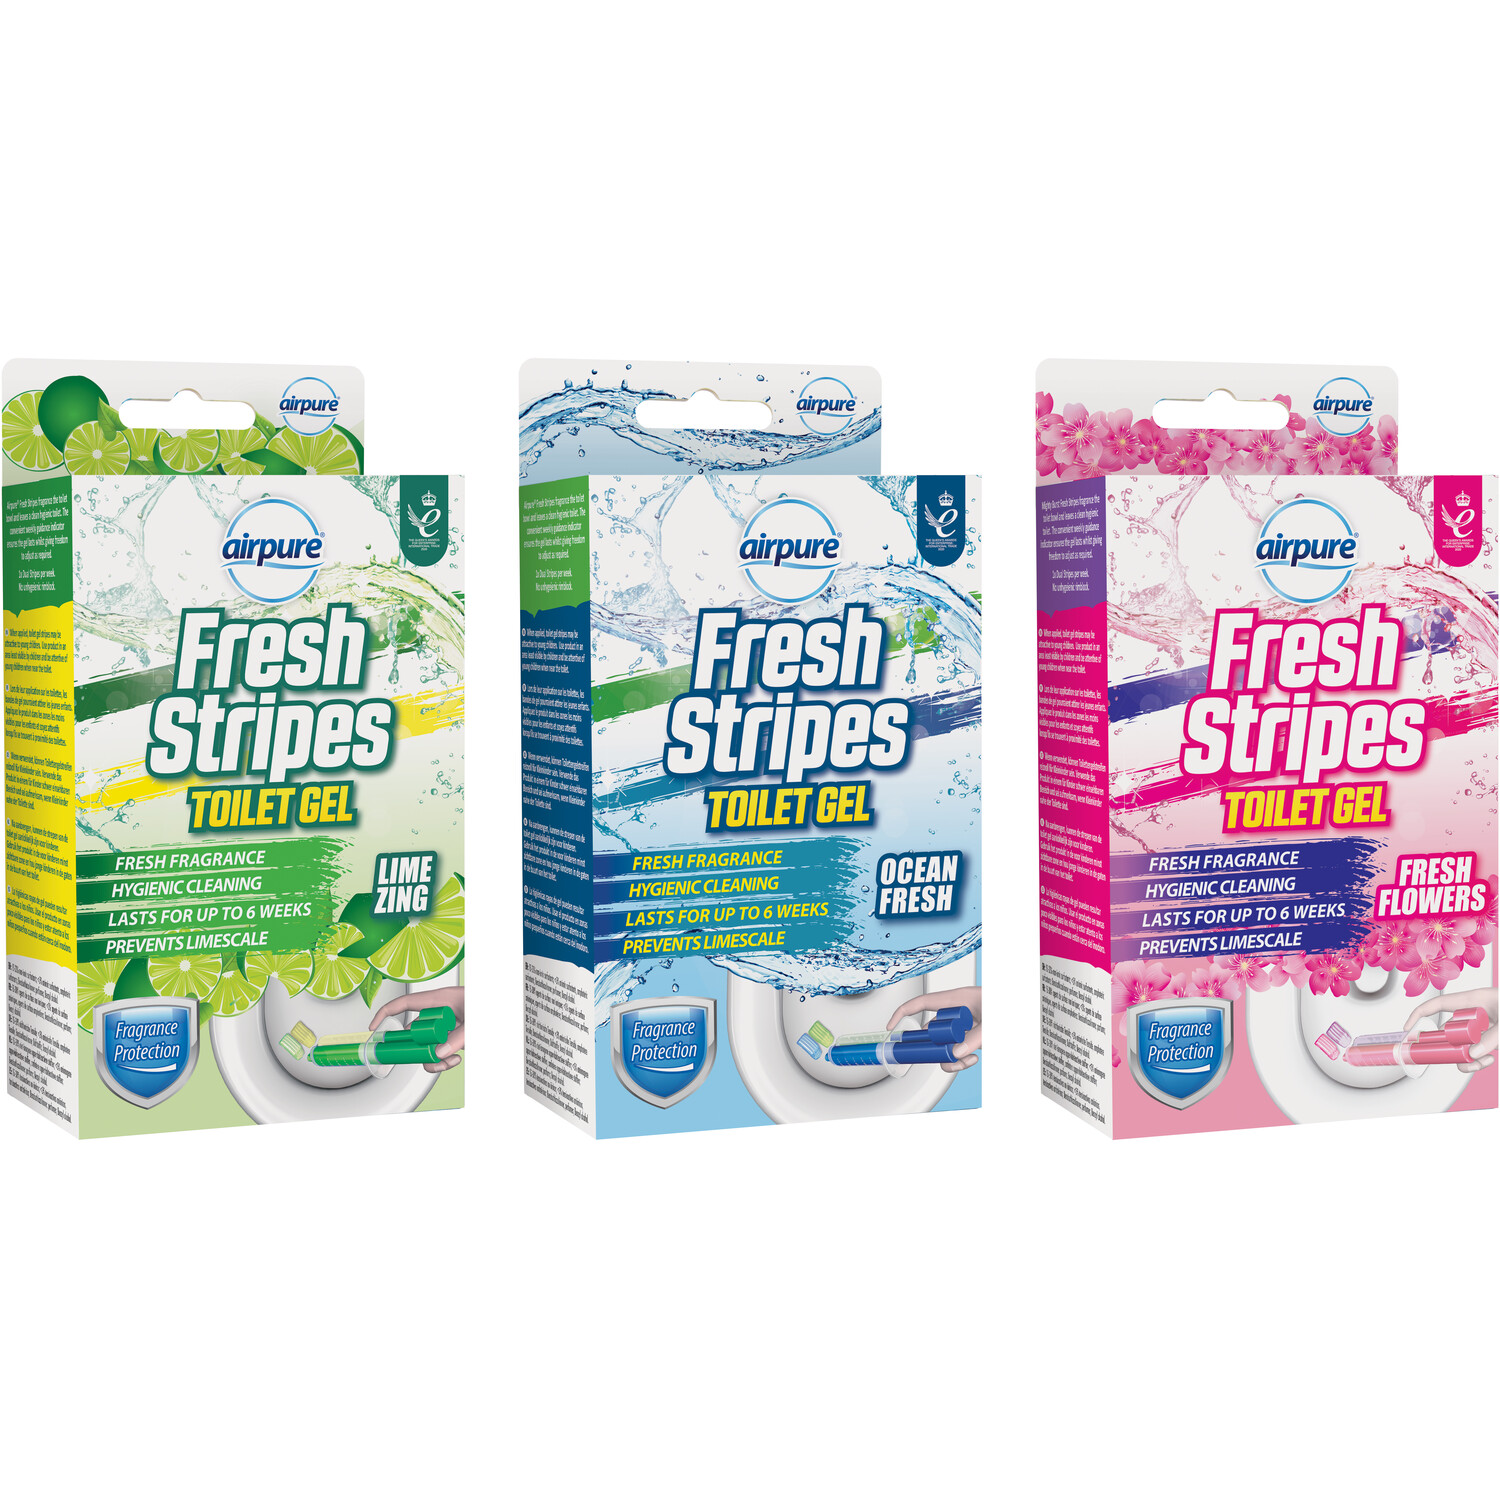 Single Airpure Fresh Stripes Toilet Cleaner Gel 110g in Assorted styles Image